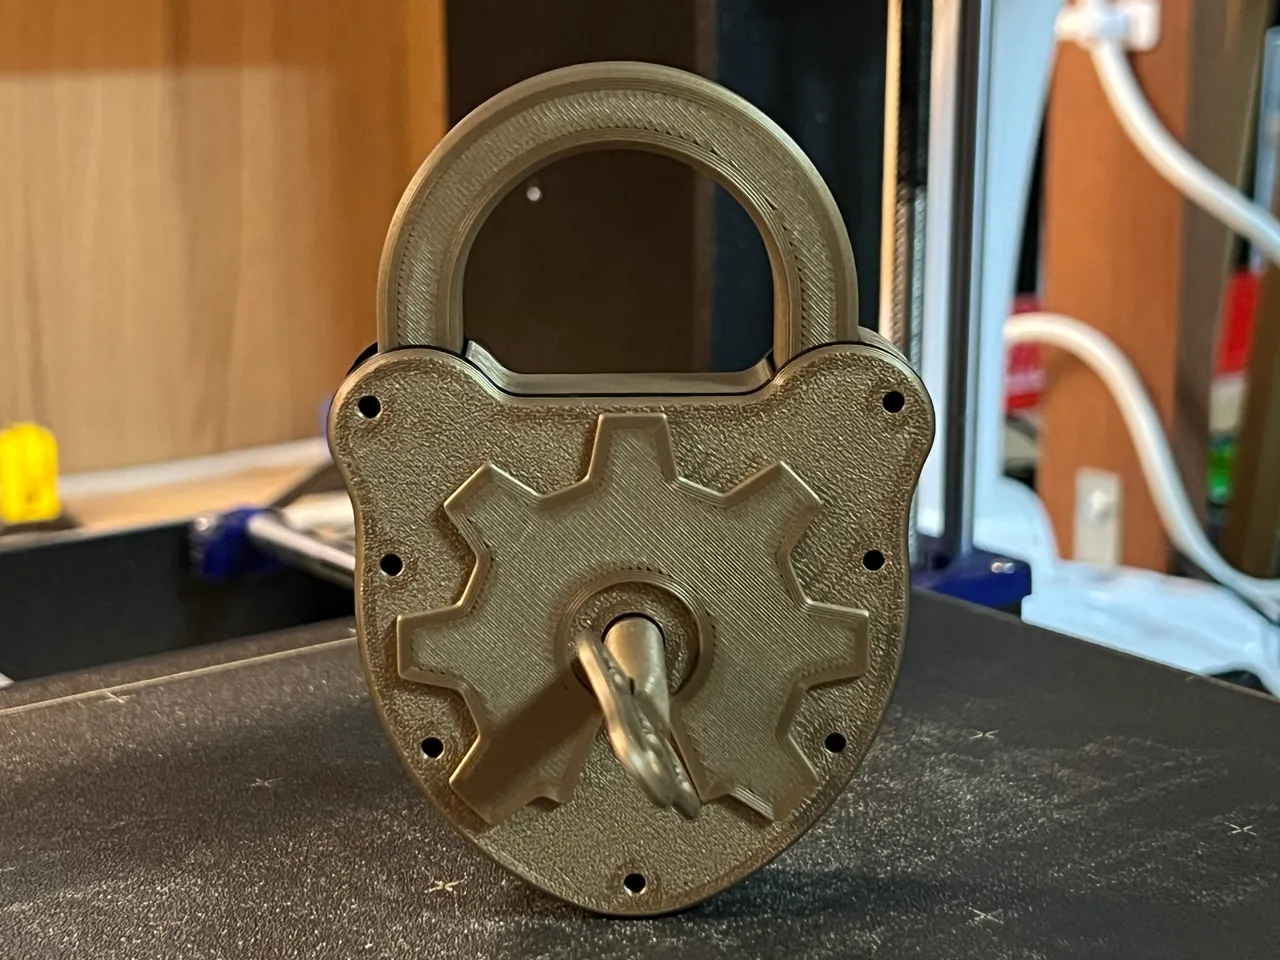 Should any skeleton key work on this lock?